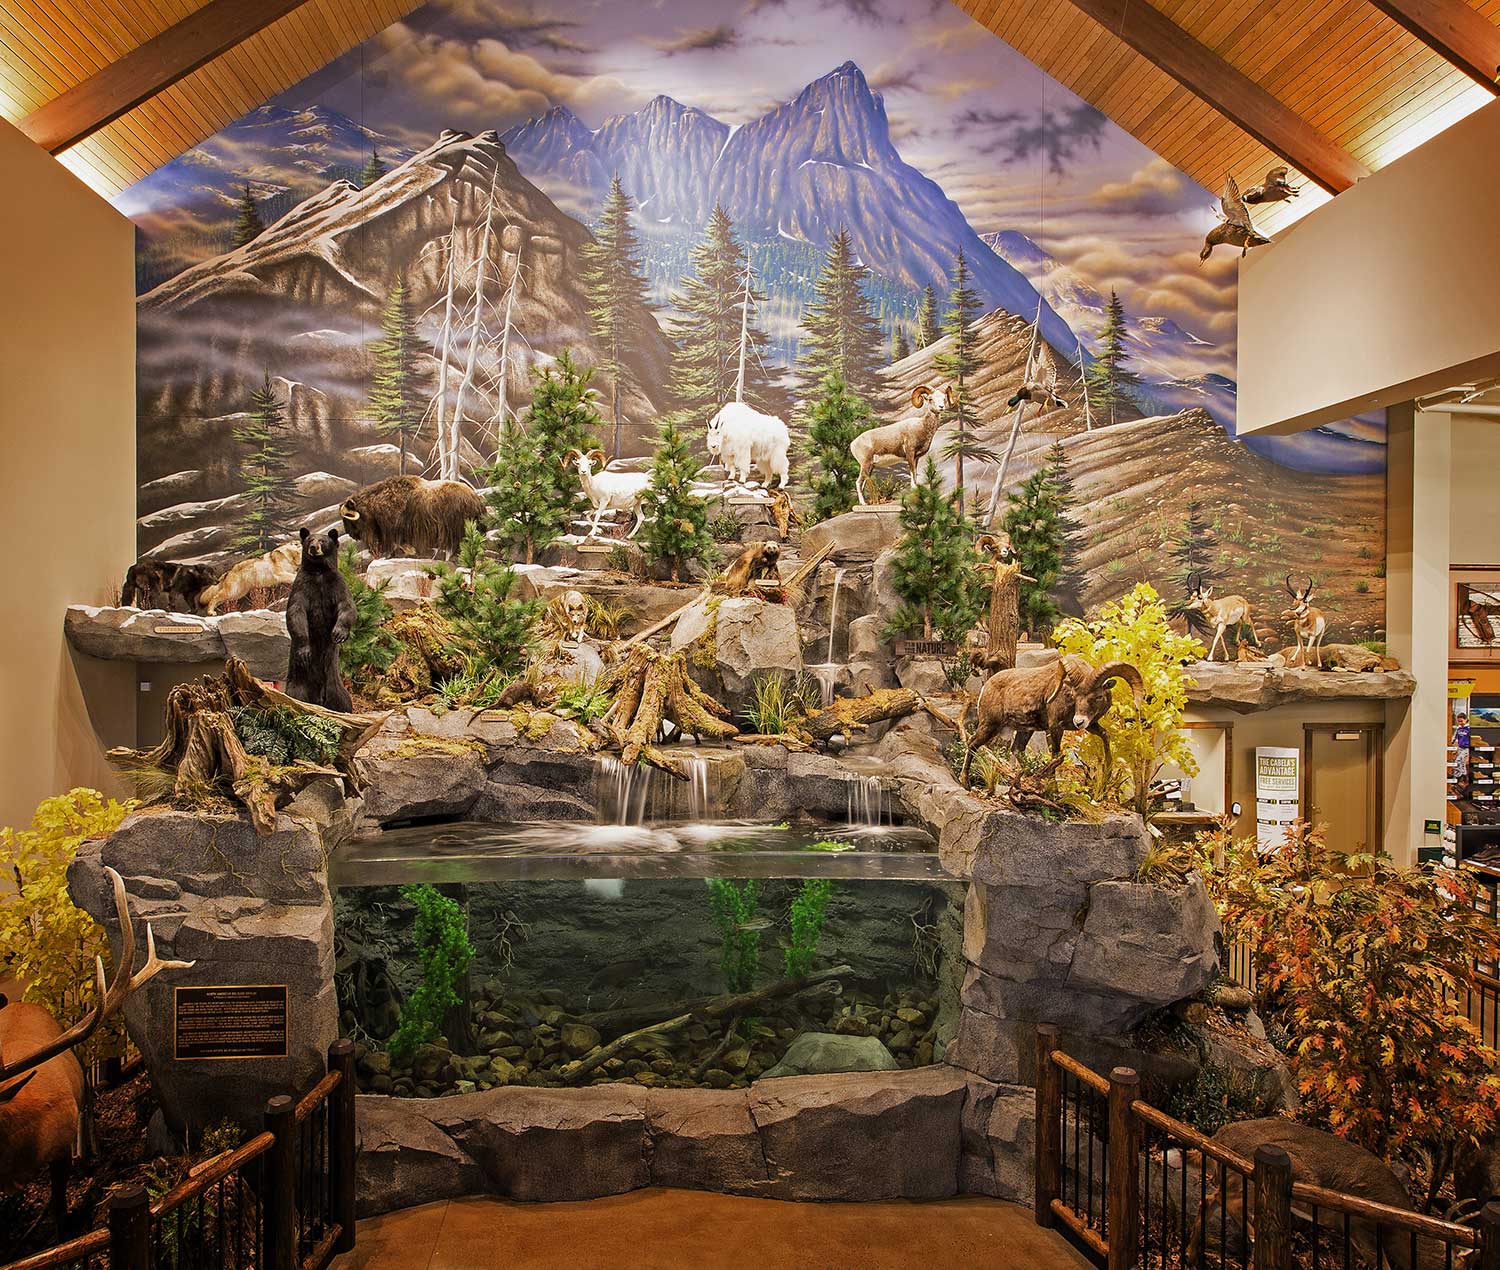 Mural Diorama on location for Corporate Sporting Goods Chain